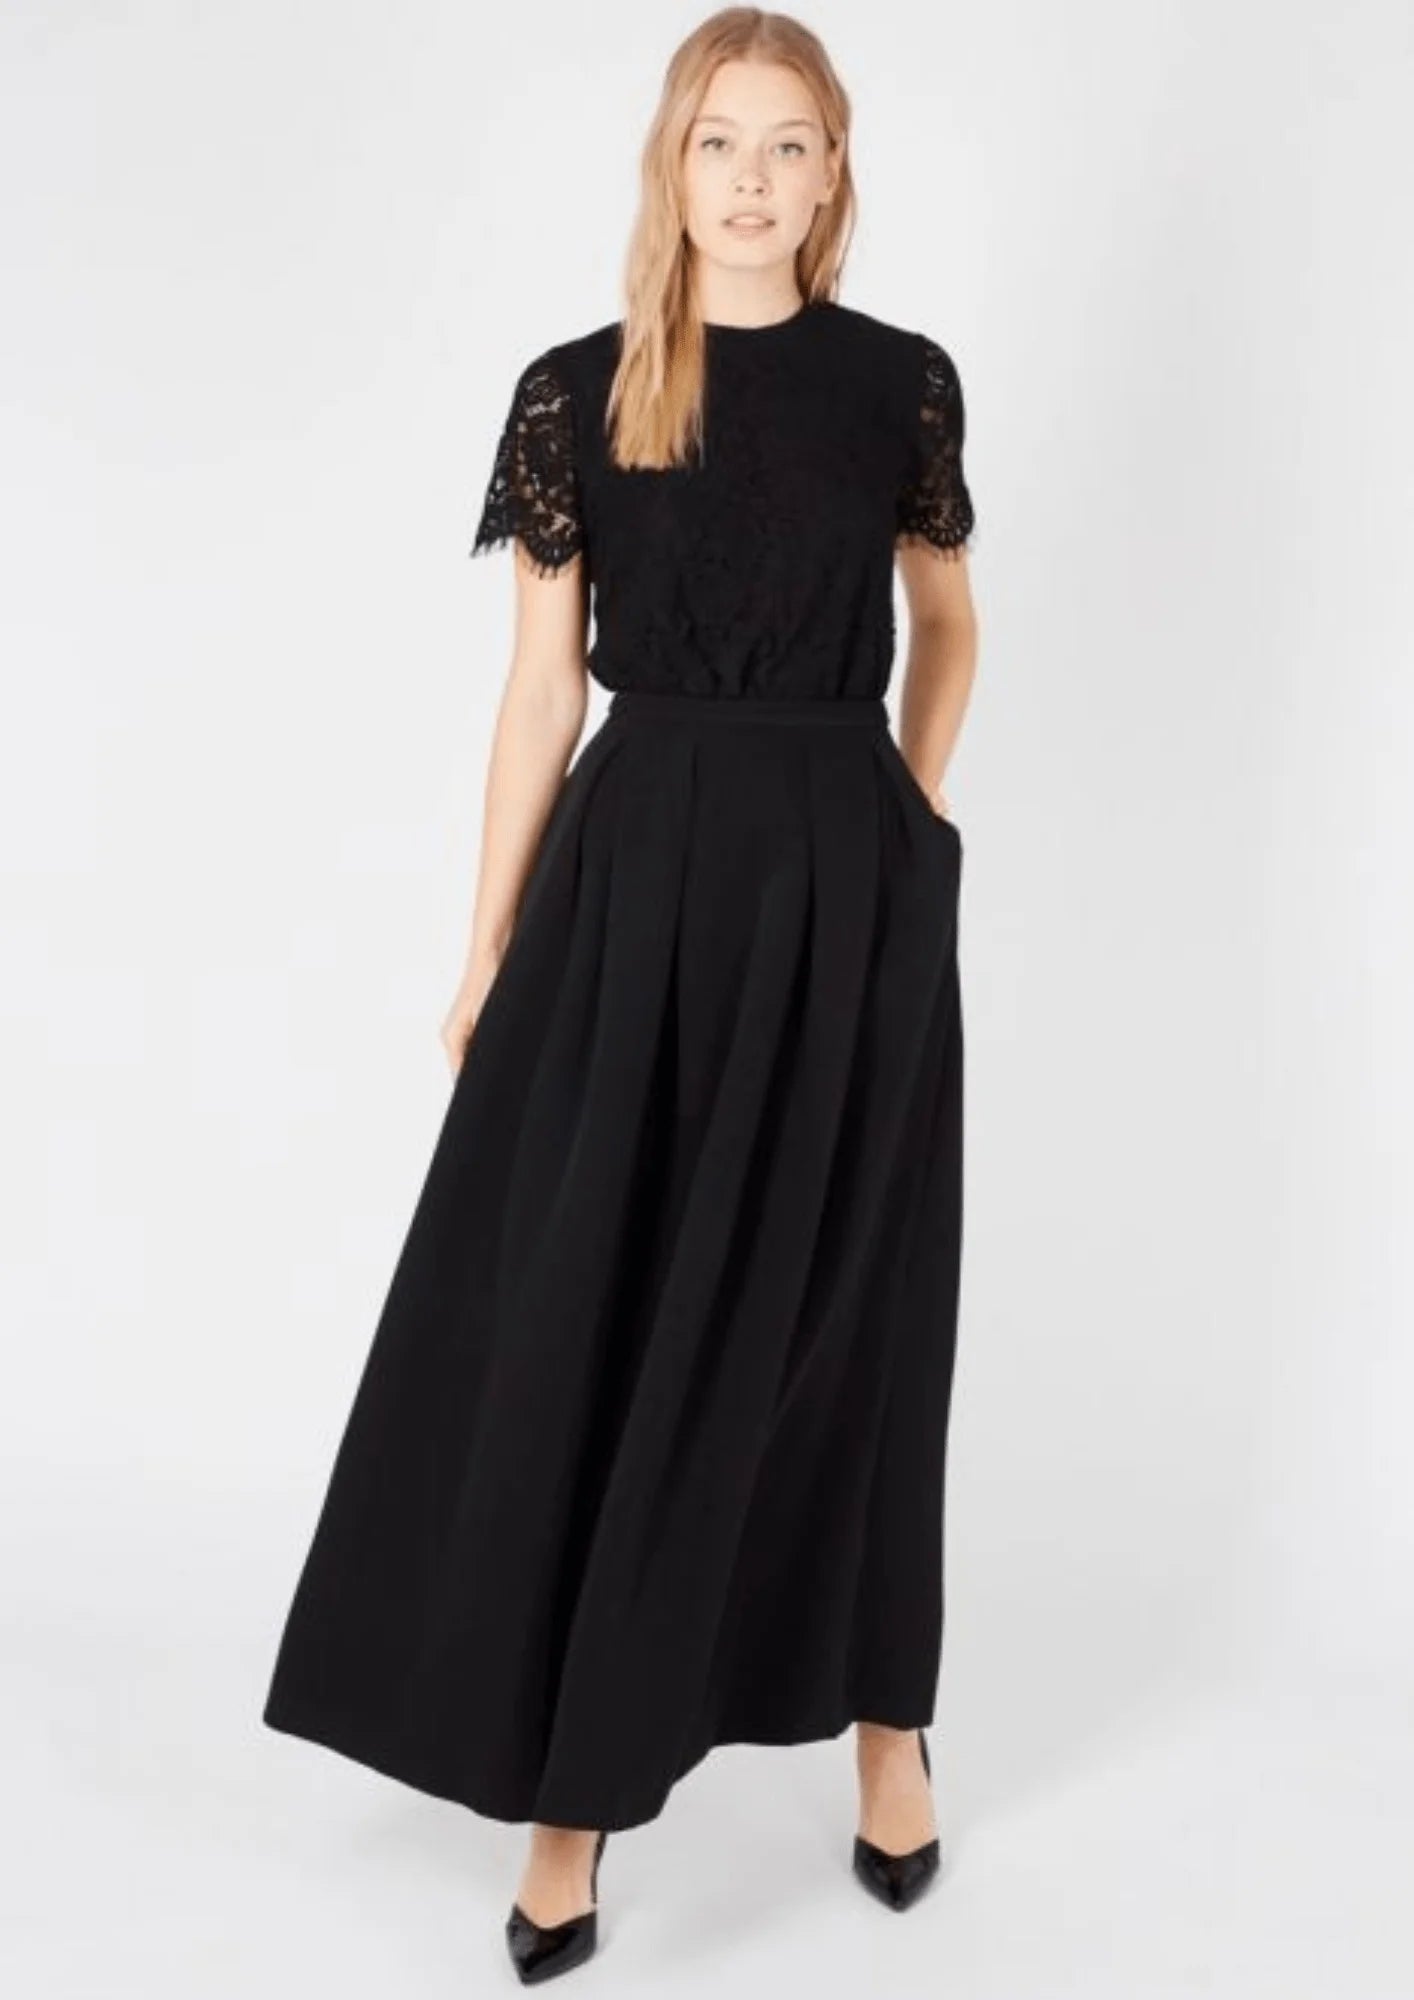 BLACK LONG DRESS WITH LACE